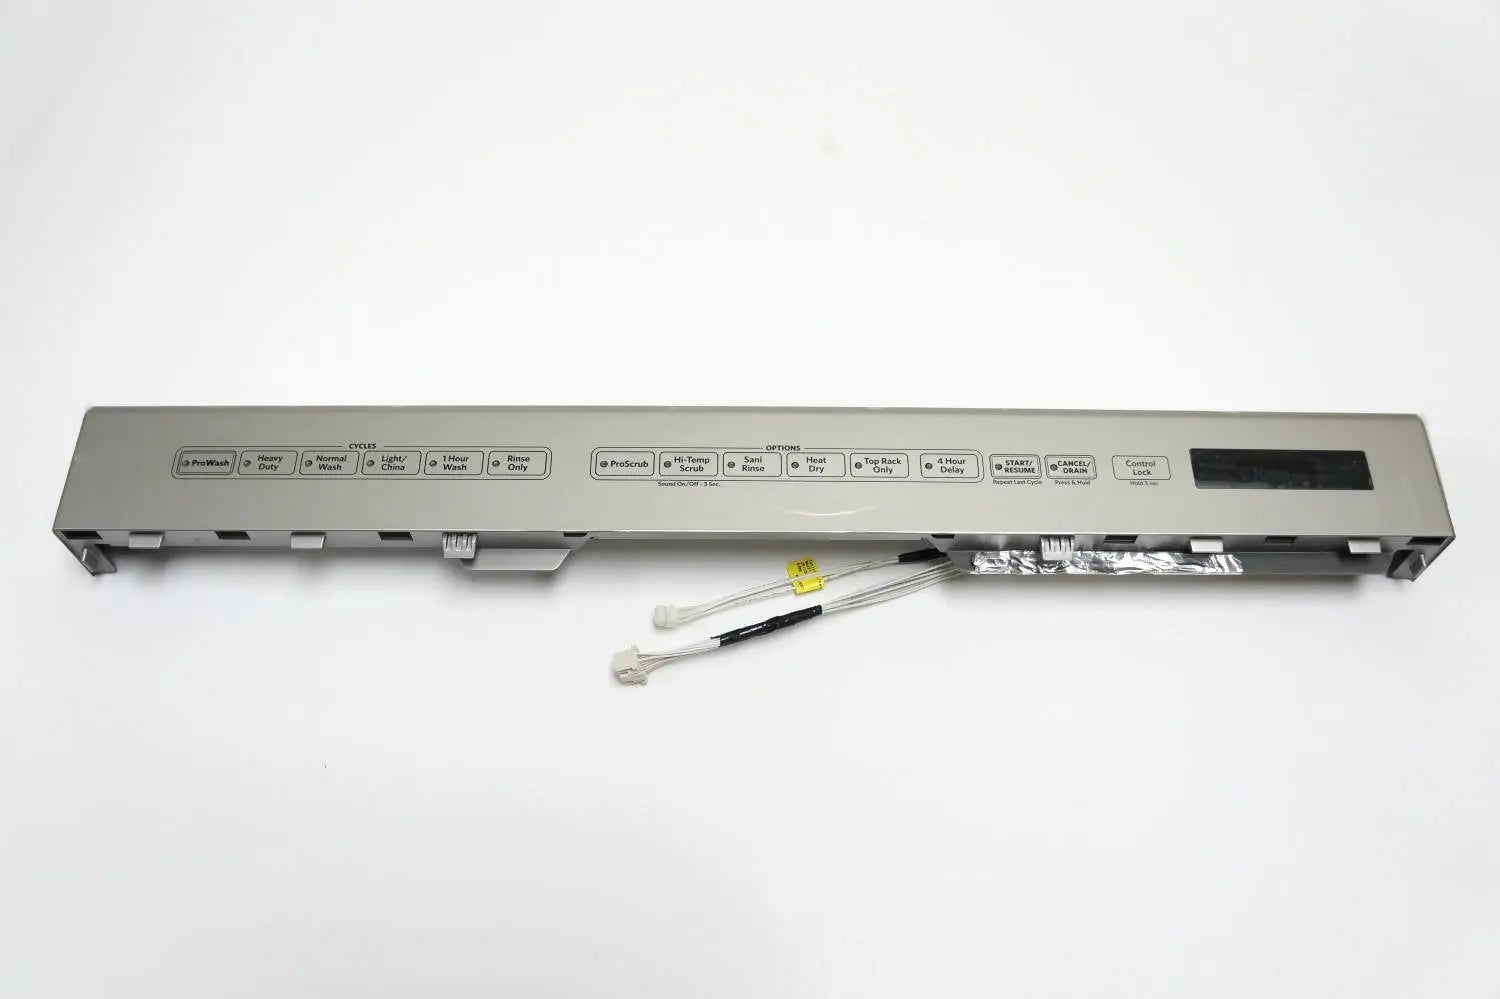 Whirlpool Dishwasher Control Panel, Stainless - WPW10500166, Replaces: 2684537 4447767 AH11755691 AP5669031 AP6022358 EA11755691 EAP11755691 EAP6447905 PS11755691 PS6447905 W10195820 W10386827 W10493367 W10493380 W10500162 W10500166 OEM PARTS WORLD